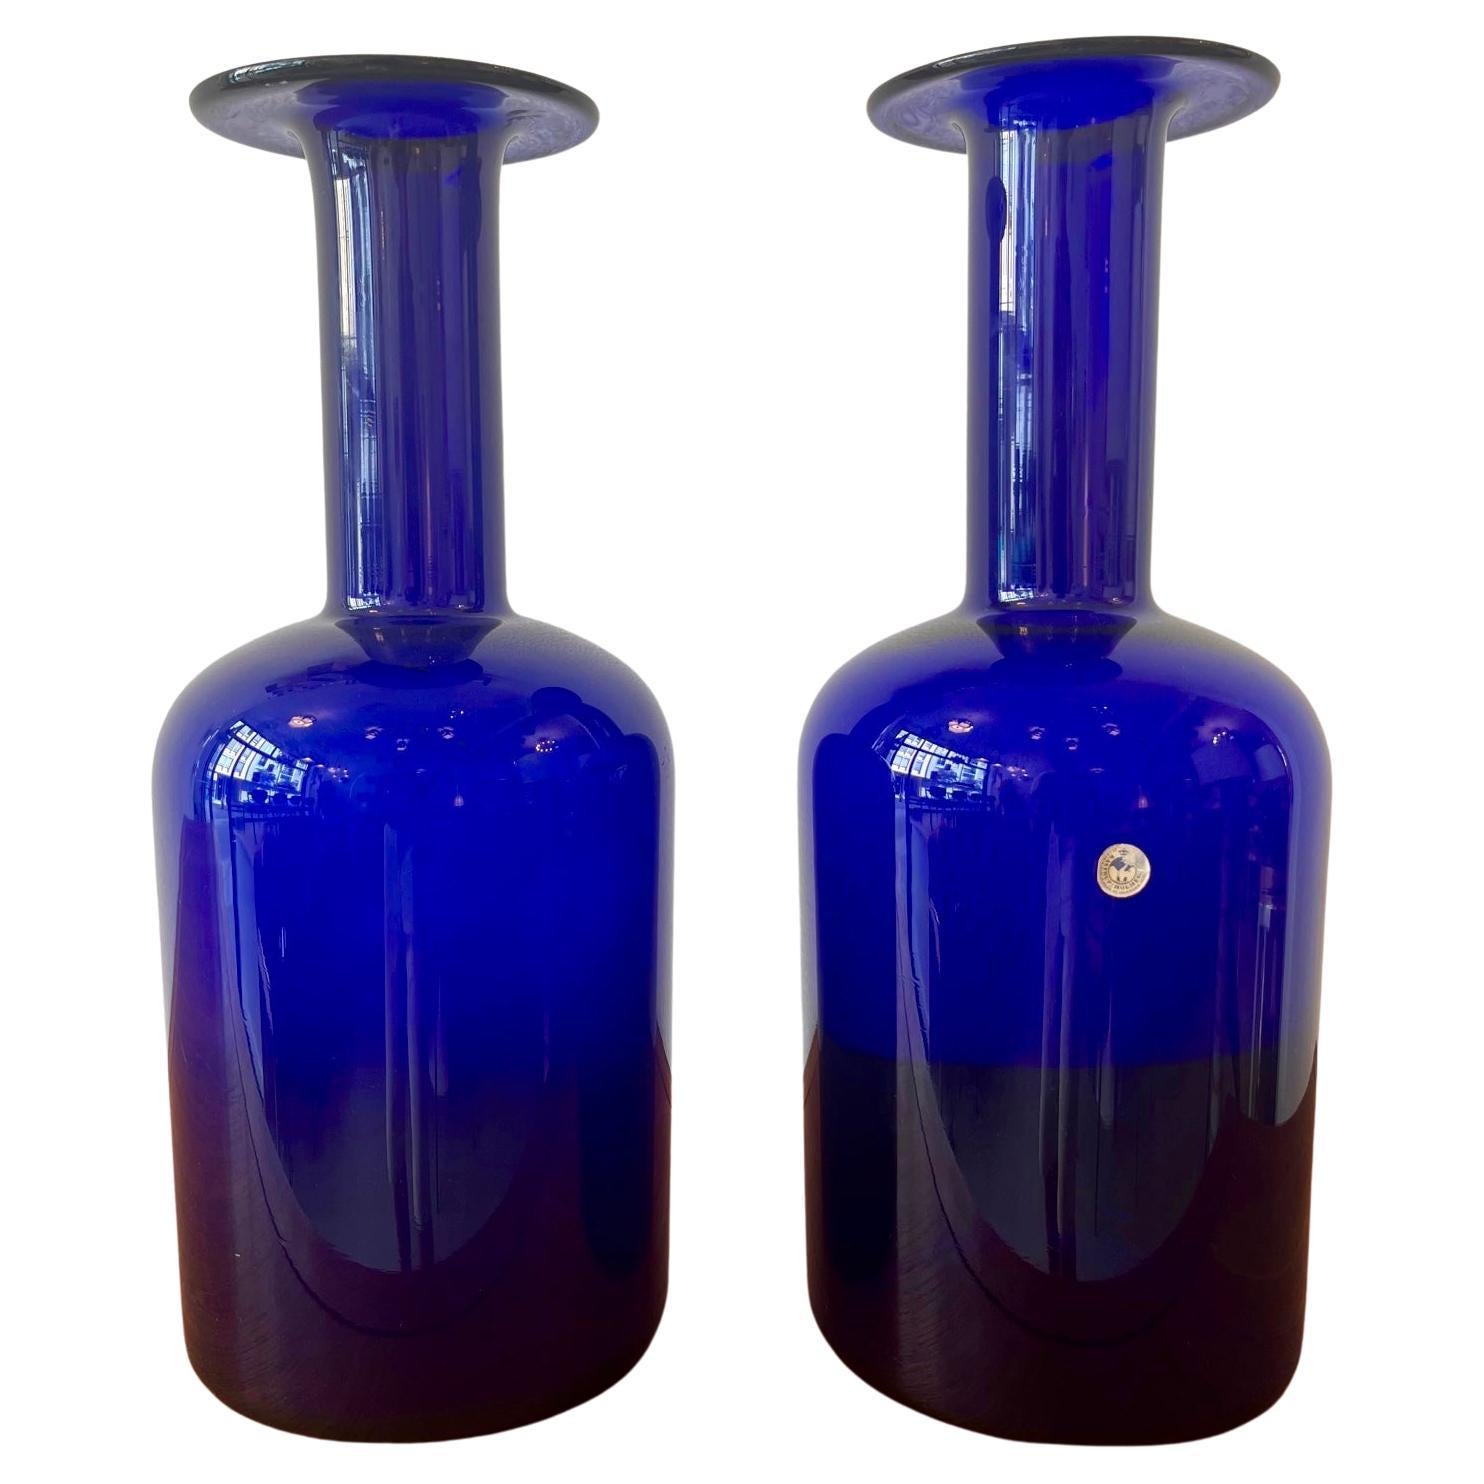 2 Blue "Gulvase" Glass Vases by Otto Bauer produced by Holmegaard, Denmark 1960s